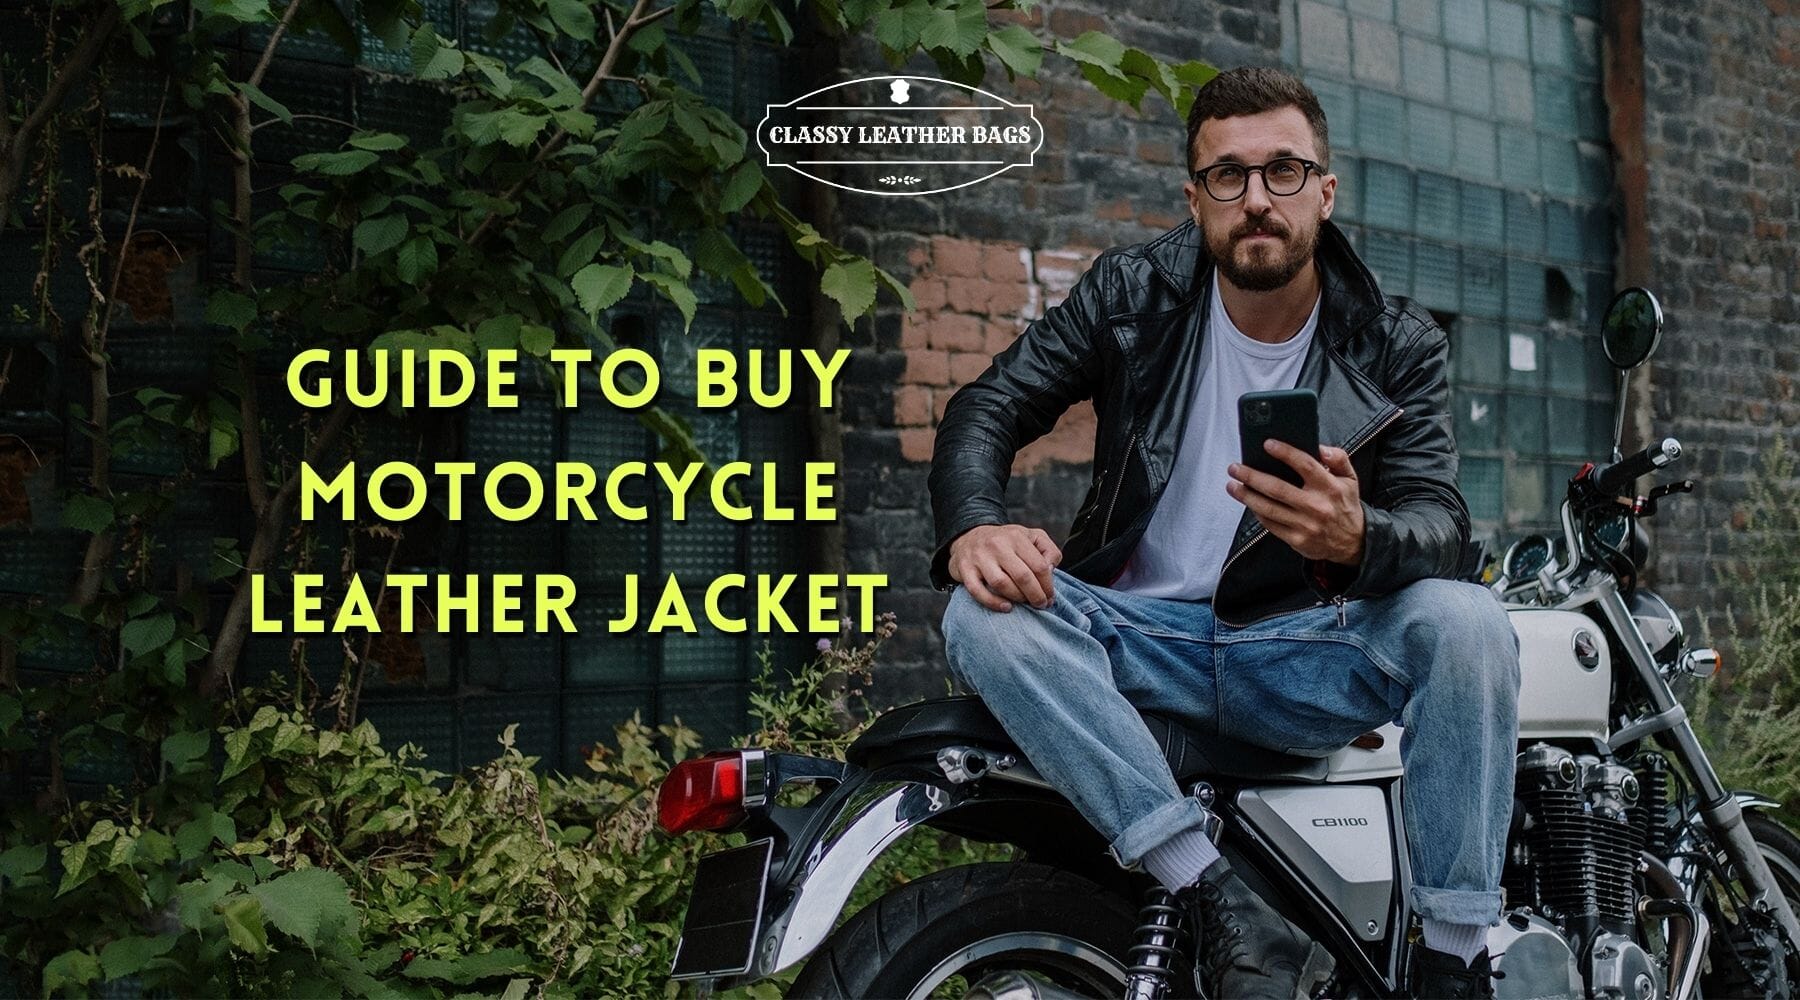 Guide to buy Motorcycle Leather Jackets 